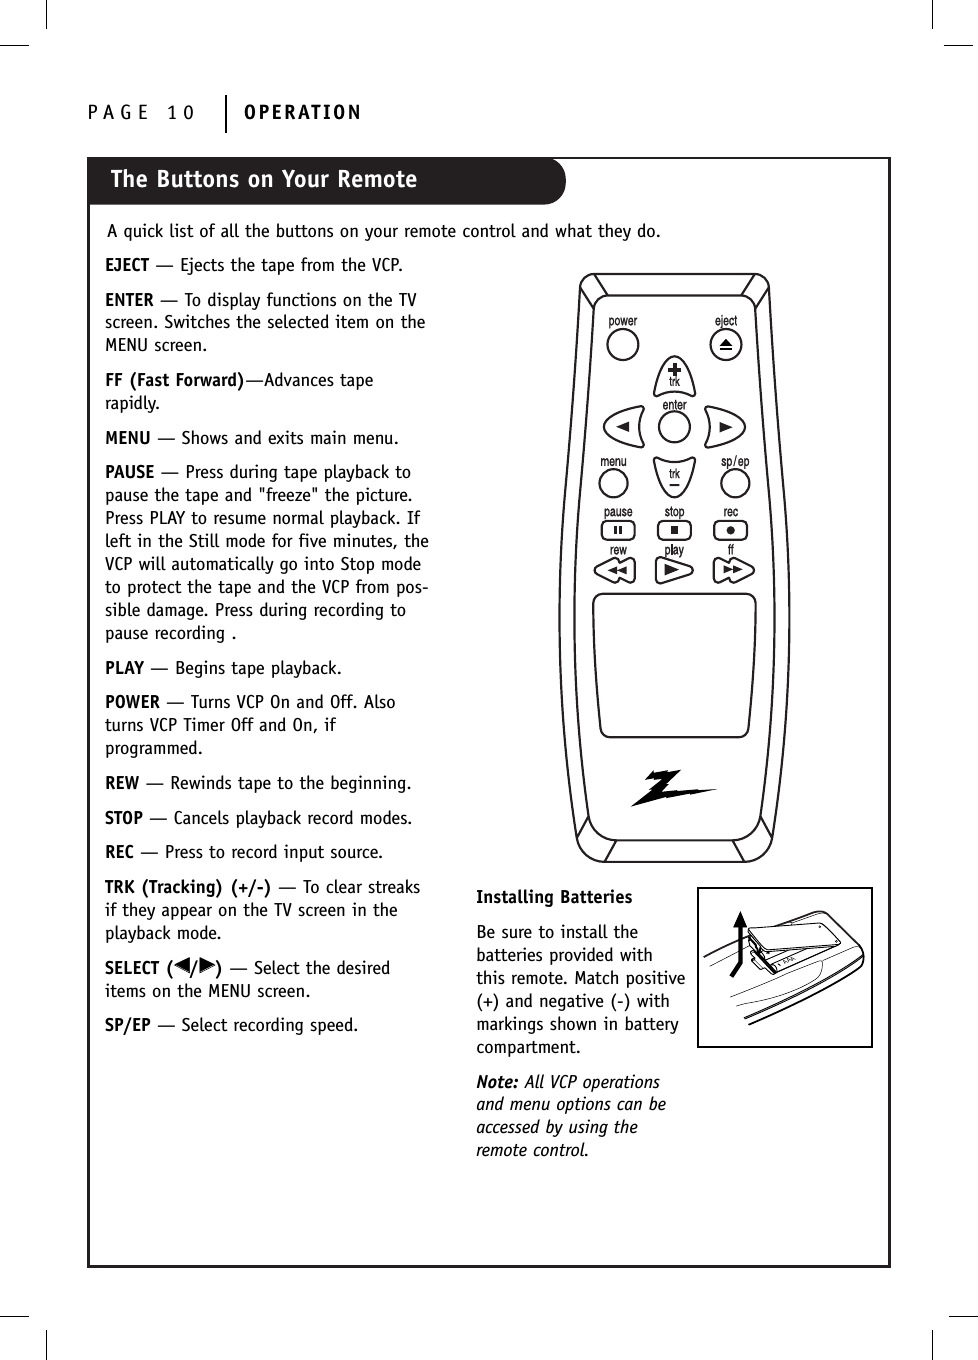 The Buttons on Your RemotePAGE 10 OPERATIONA quick list of all the buttons on your remote control and what they do.AAAInstalling BatteriesBe sure to install the batteries provided withthis remote. Match positive(+) and negative (-) with markings shown in battery compartment.Note: All VCP operationsand menu options can beaccessed by using theremote control.EJECT — Ejects the tape from the VCP.ENTER — To display functions on the TVscreen. Switches the selected item on theMENU screen.FF (Fast Forward)—Advances tape rapidly.MENU — Shows and exits main menu.PAUSE — Press during tape playback topause the tape and &quot;freeze&quot; the picture.Press PLAY to resume normal playback. Ifleft in the Still mode for five minutes, theVCP will automatically go into Stop modeto protect the tape and the VCP from pos-sible damage. Press during recording topause recording .PLAY — Begins tape playback.POWER — Turns VCP On and Off. Alsoturns VCP Timer Off and On, if programmed.REW — Rewinds tape to the beginning.STOP — Cancels playback record modes.REC — Press to record input source.TRK (Tracking) (+/-) — To clear streaksif they appear on the TV screen in theplayback mode. SELECT (FF/GG)— Select the desireditems on the MENU screen.SP/EP — Select recording speed.